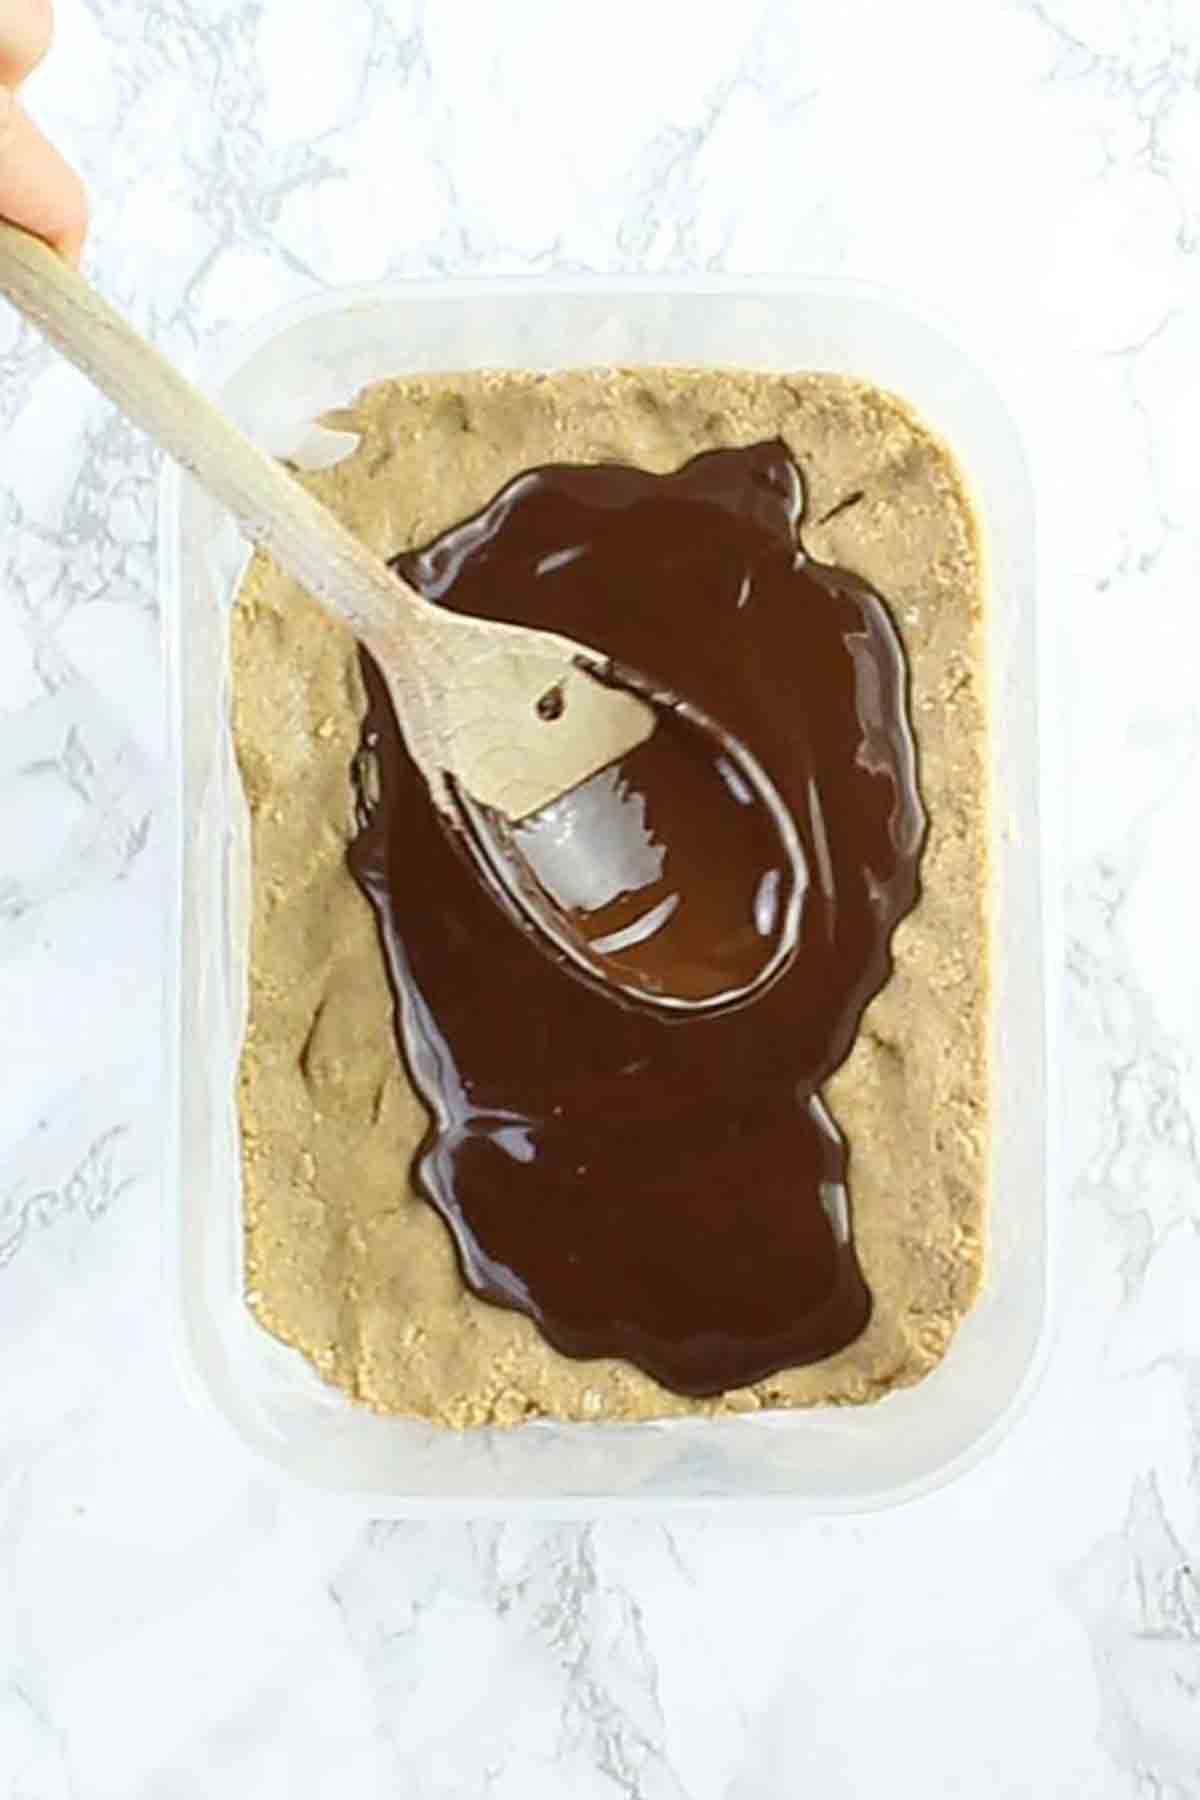 Spreading Dairy Free Chocolate Onto The Peanut Butter Base